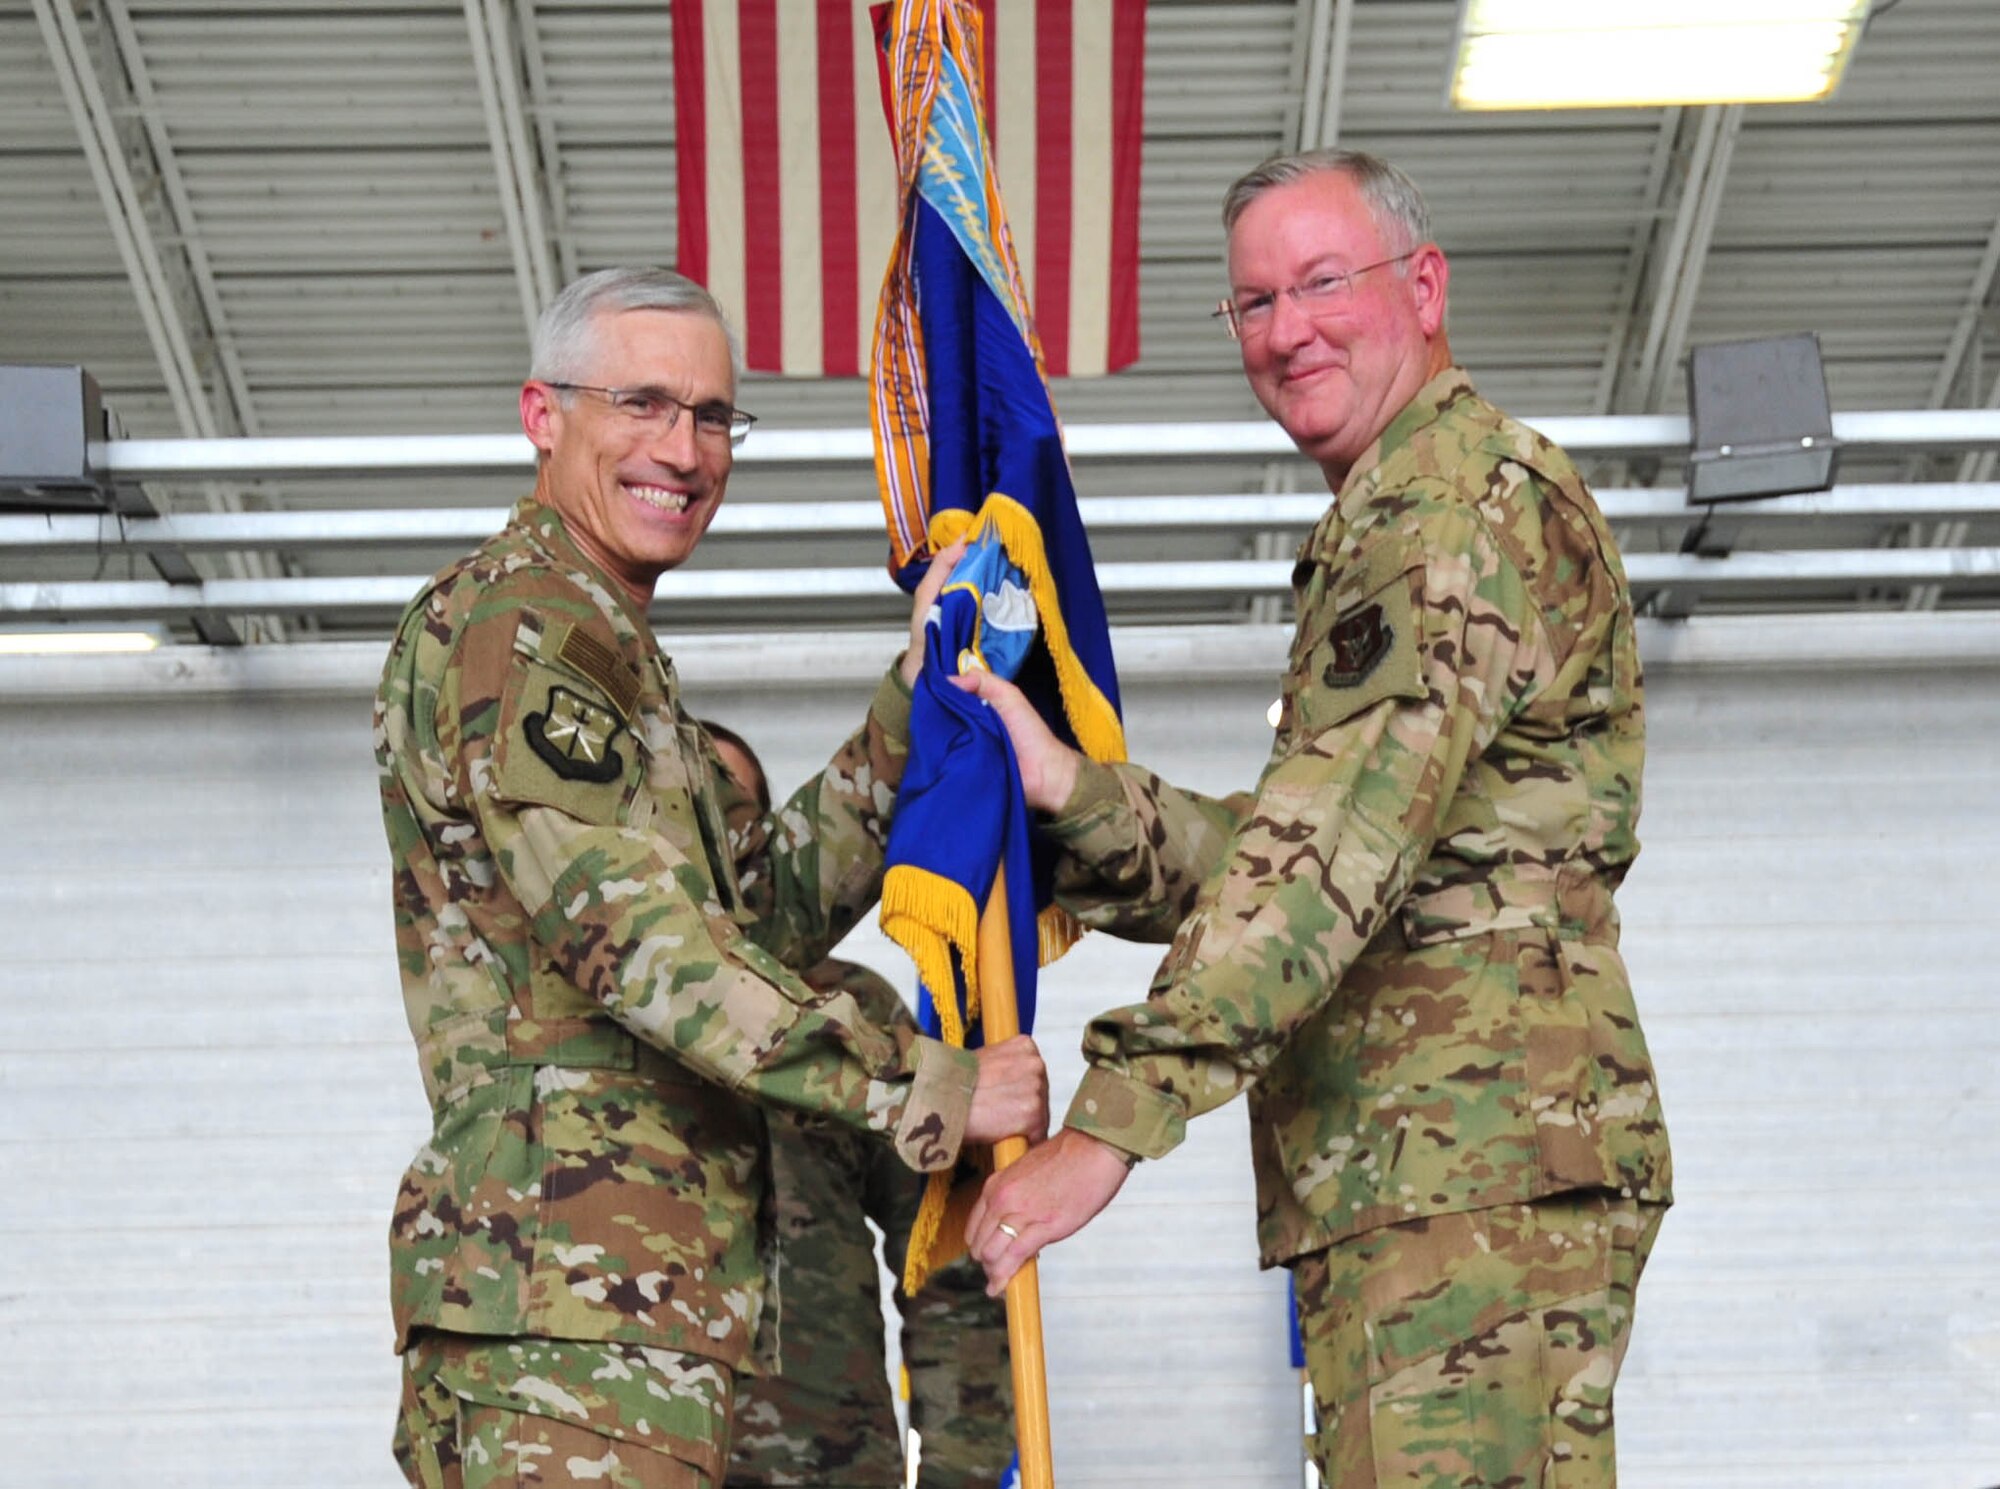 Maj. Gen. Craig L. LaFave, 22nd Air Force commander, passes the 403rd guidon to Col. Jeffrey A. Van Dootingh, during the 403rd Wing change of command ceremony June 9, 2019 at Keesler Air Force Base, Mississippi. (U.S. Air Force photo by Tech. Sgt. Michael Farrar)